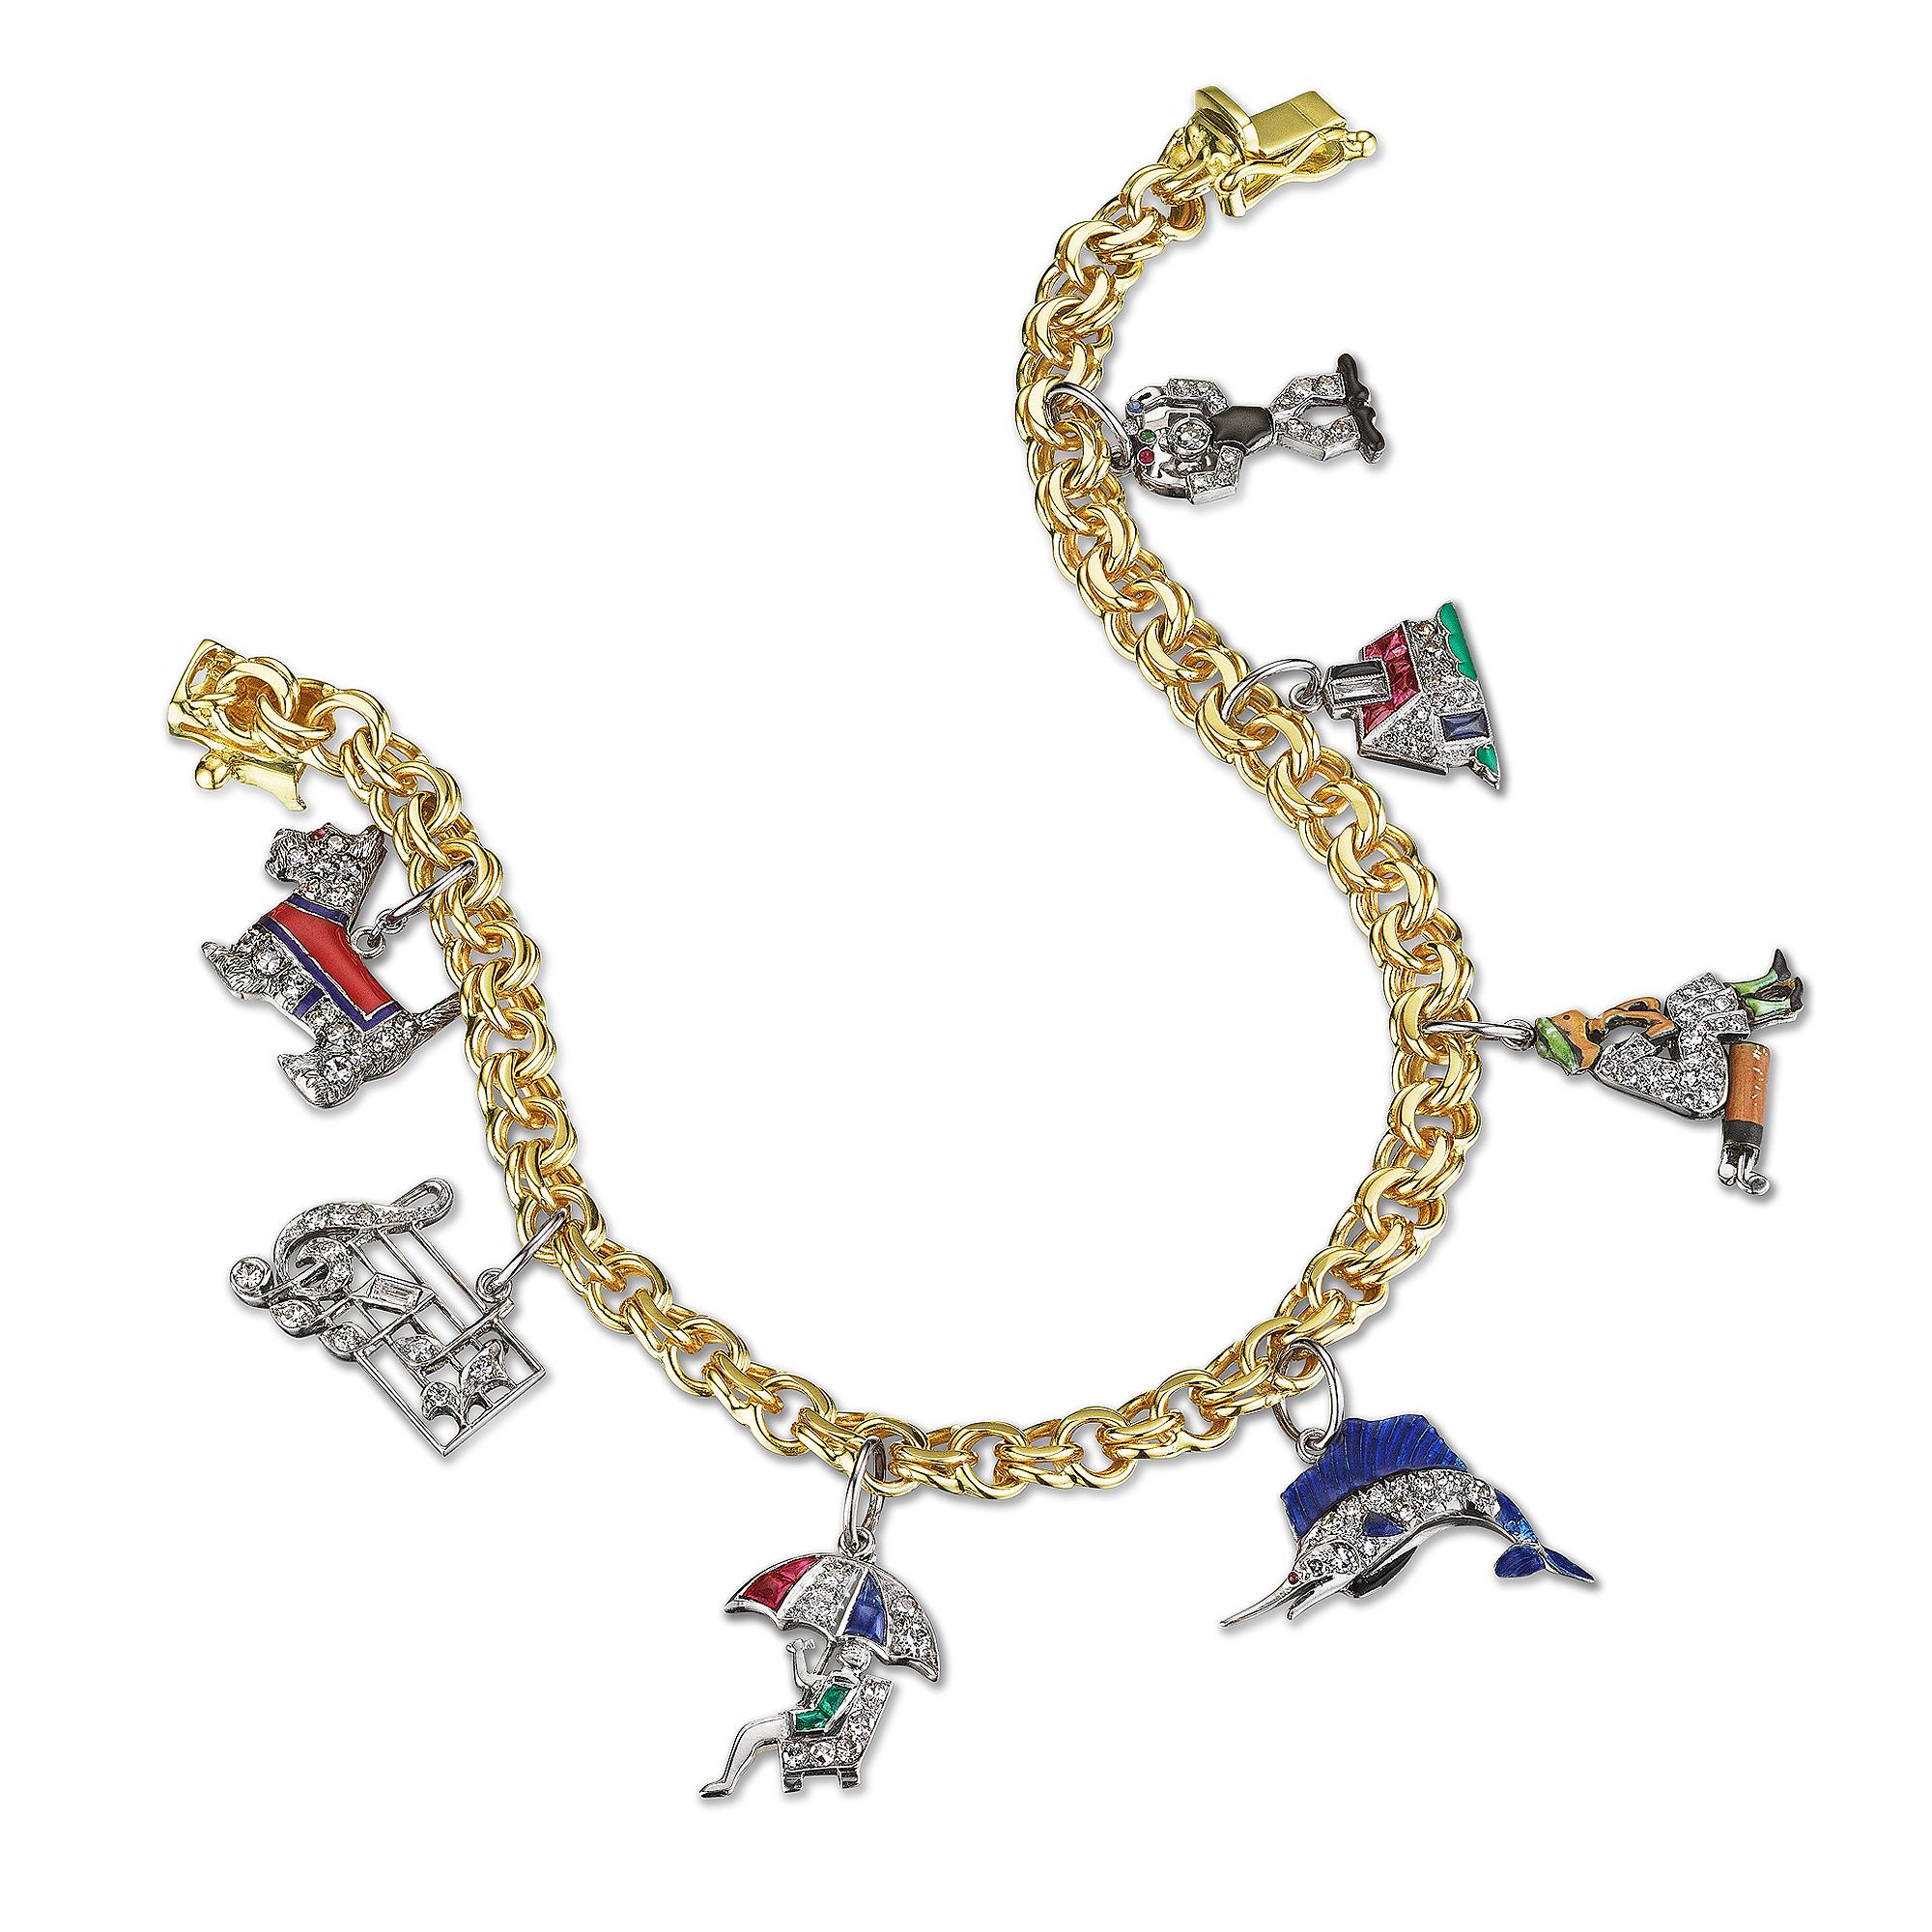 Charm yourself!  This seven charm Art Deco, circa 1920-1940, bracelet is simply enchanting.  Each whimsical platinum gemstone charm delicately dances from a 14 karat yellow gold link bracelet and is guaranteed to make you smile.  Selection of